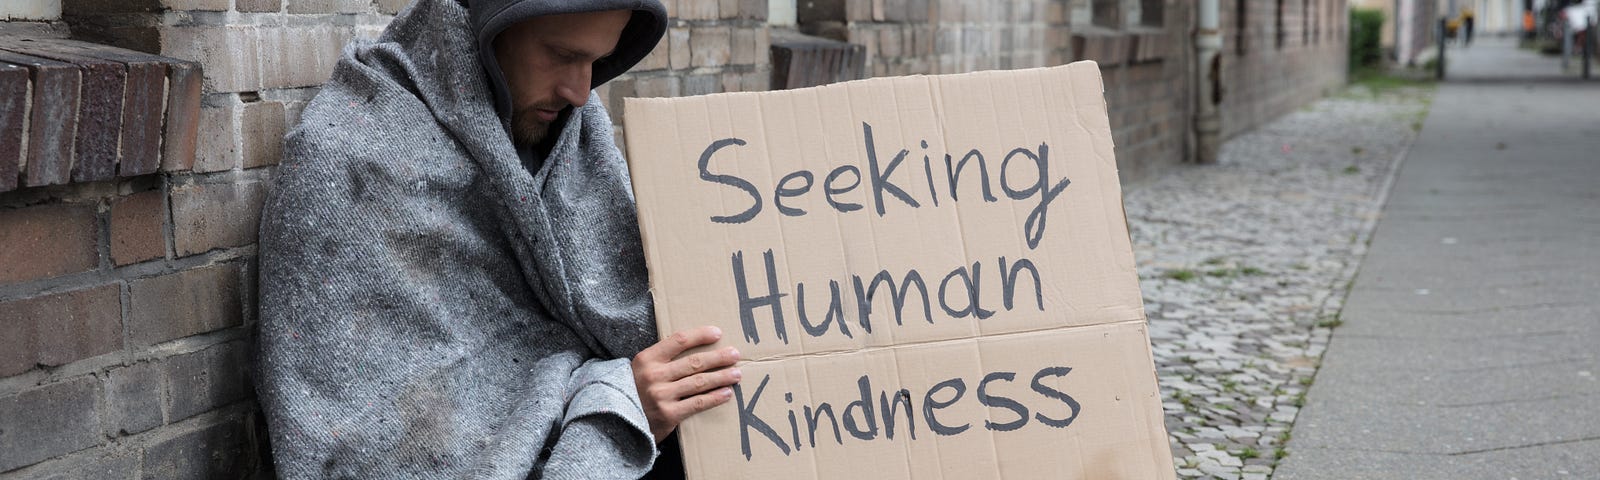 Homeless man sitting on street wrapped in blanket holding a cardboard side that reads Seeking Human Kindness